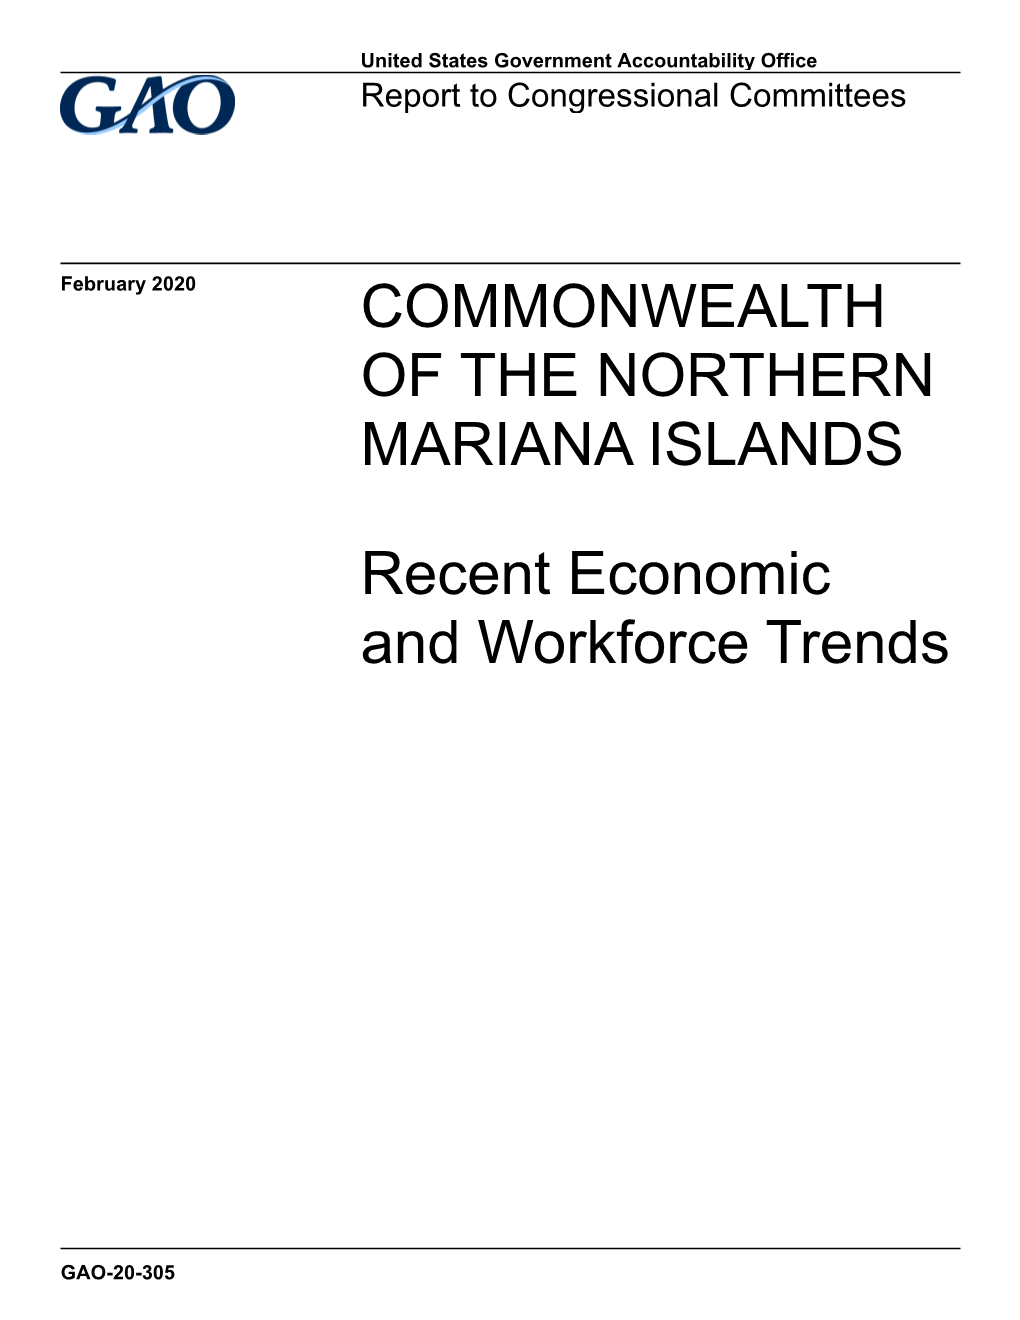 Commonwealth of the Northern Mariana Islands: Recent Economic Trends and Preliminary Observations on Workforce Data, GAO-18-373T (Washington, D.C.: Feb